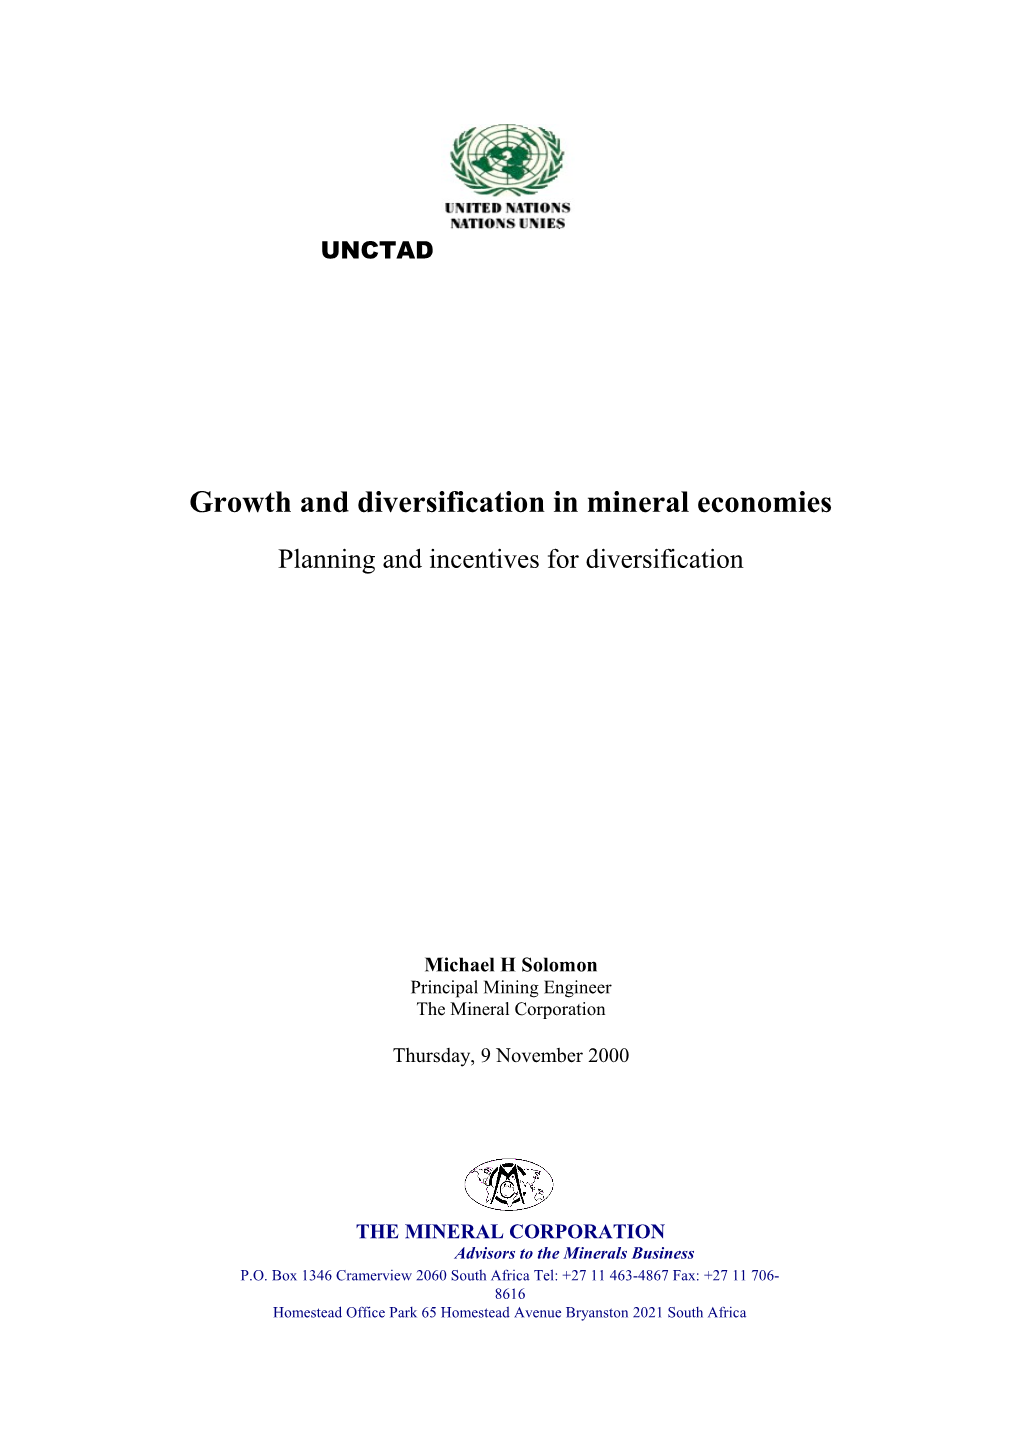 Growth and Diversification in Mineral Economies